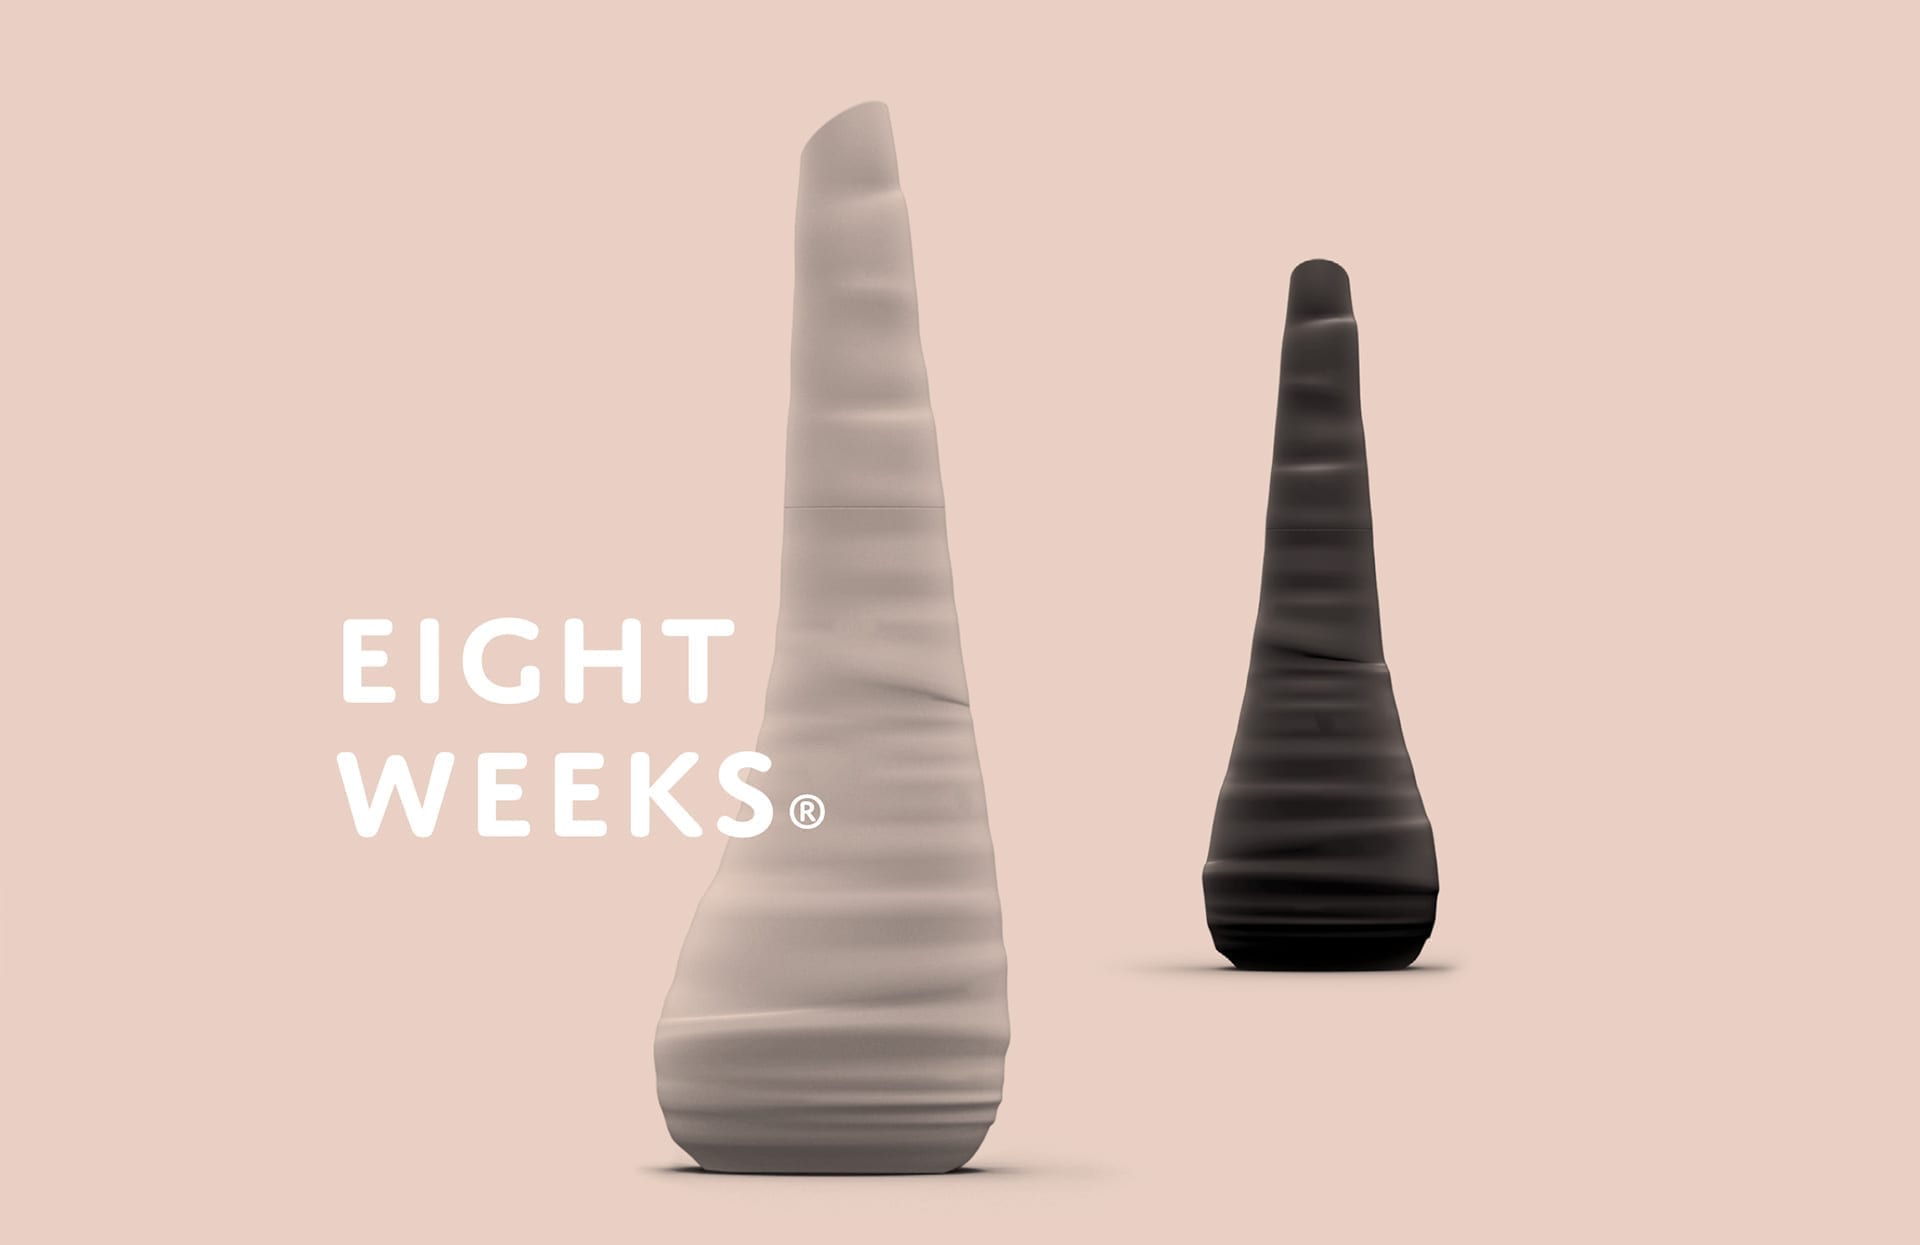 Product Eight Weeks